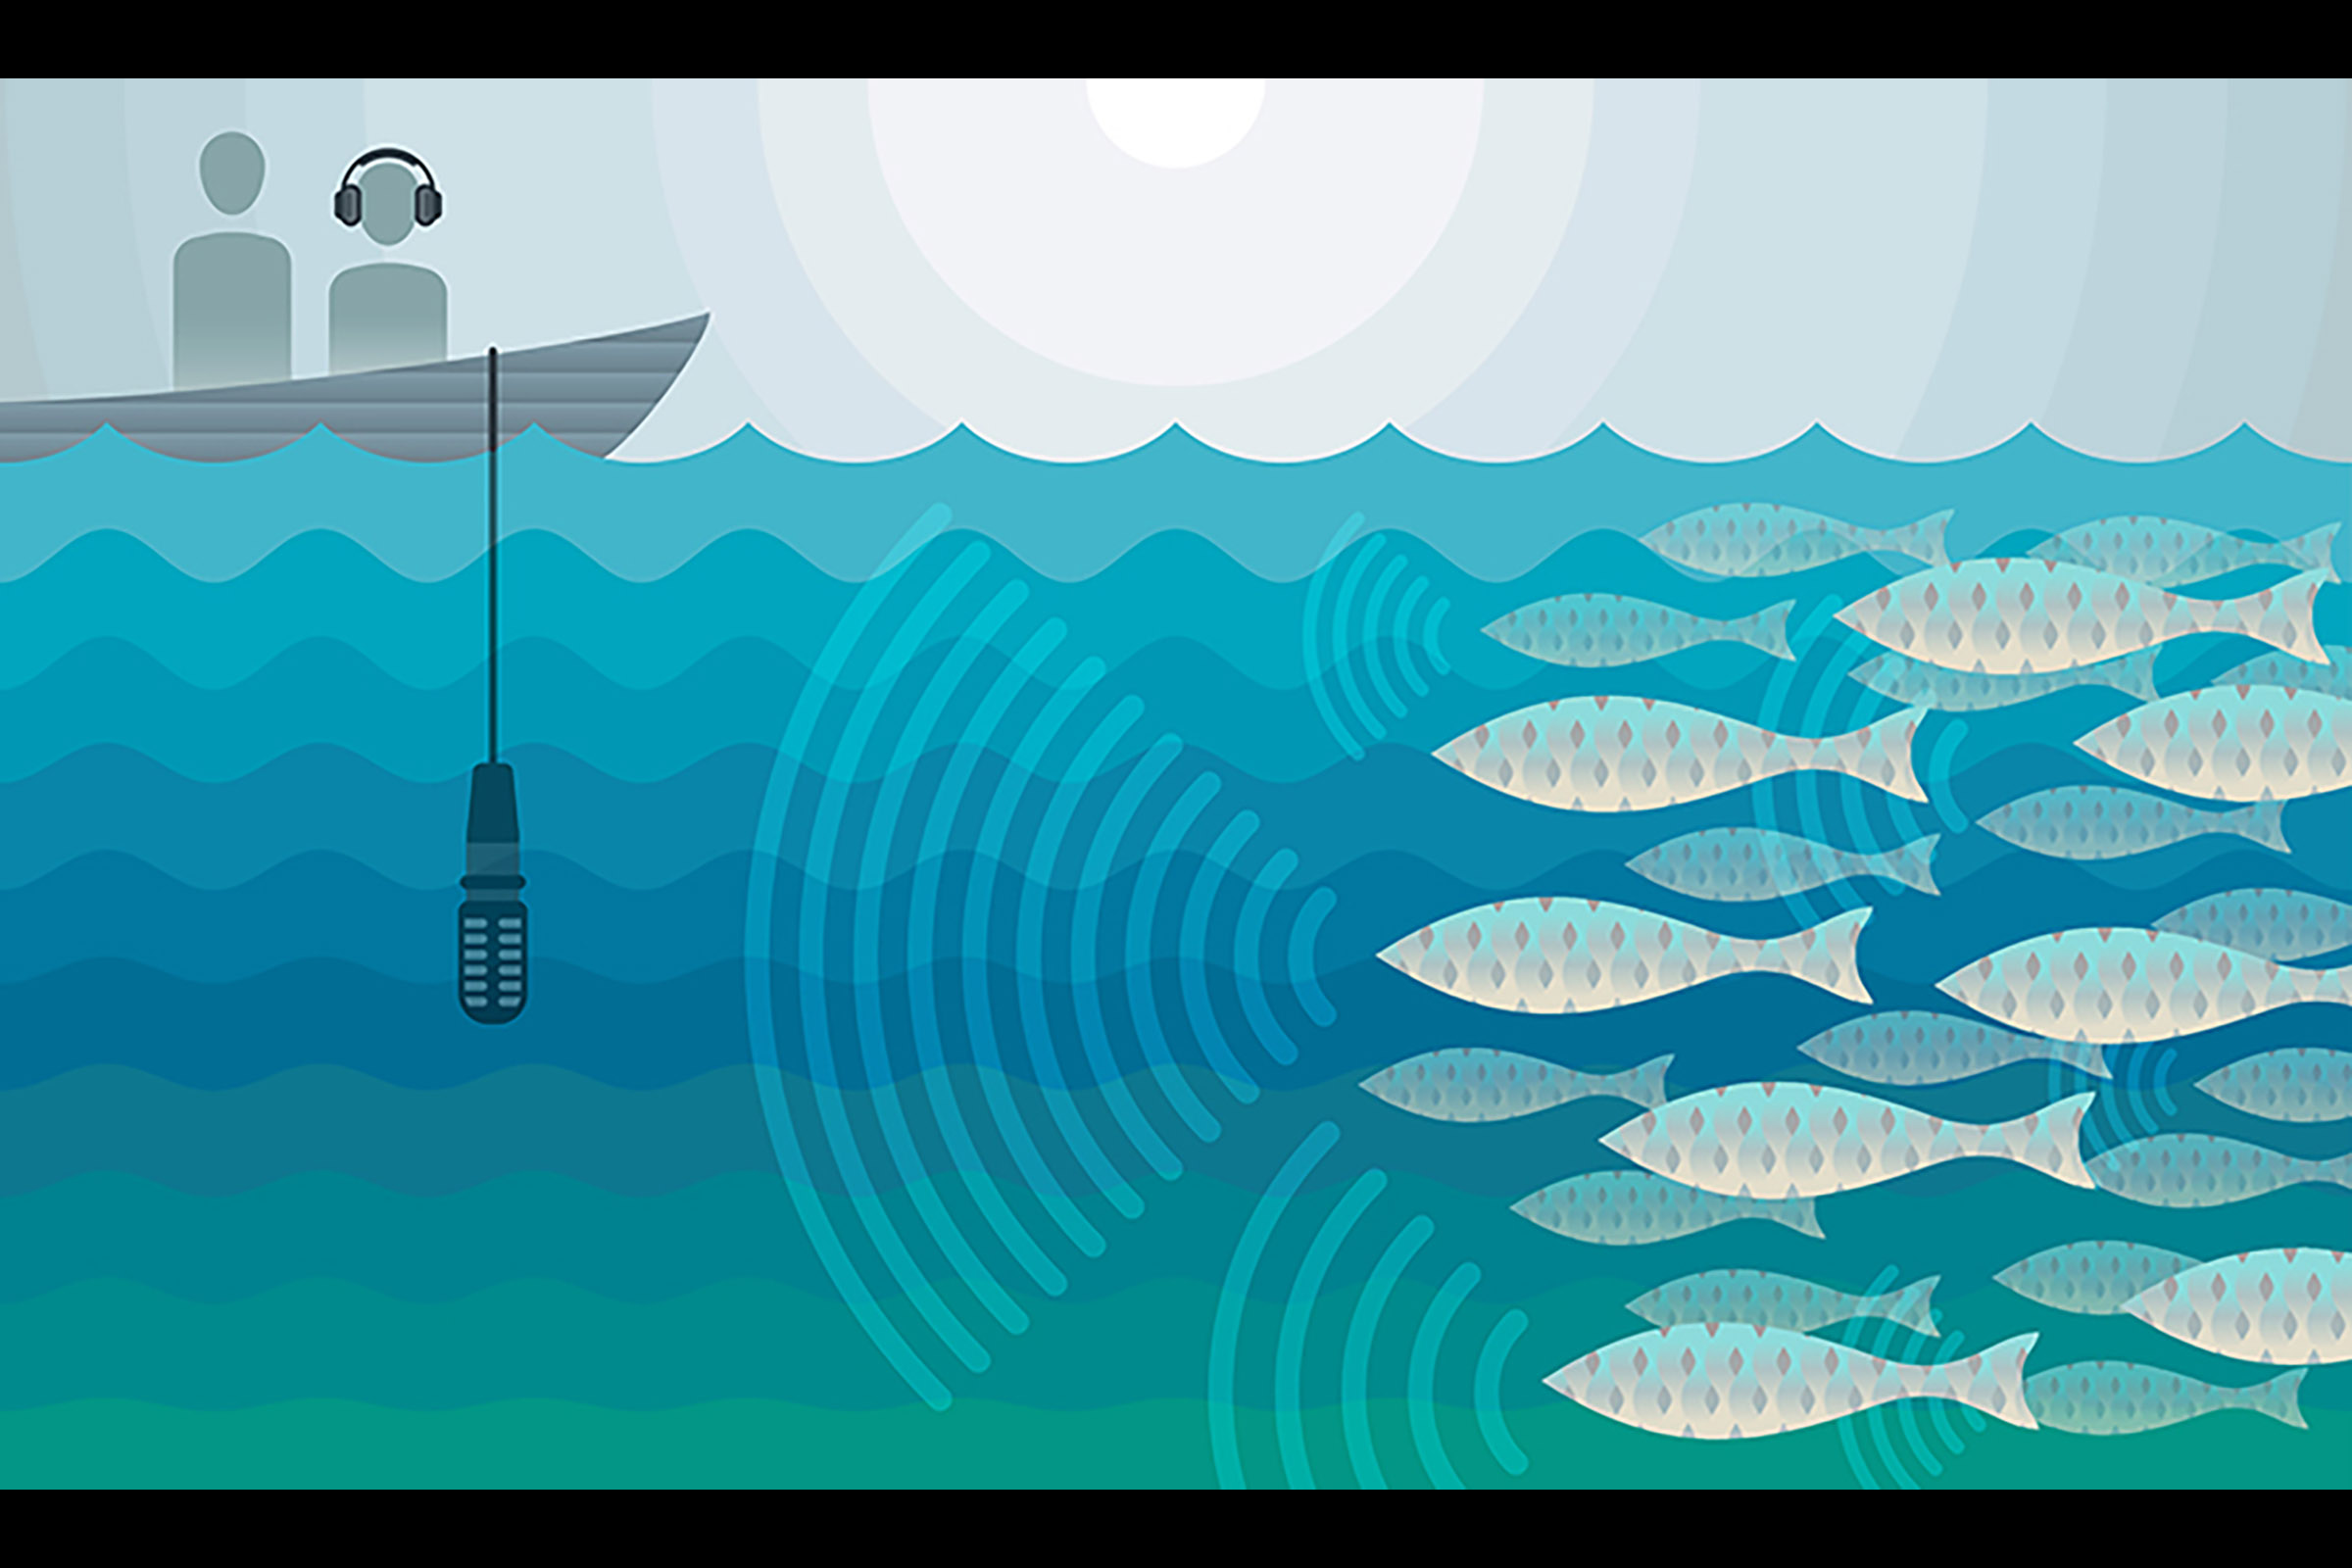 Scientists in a boat dangle a microphone in the water with nearby fish making sounds